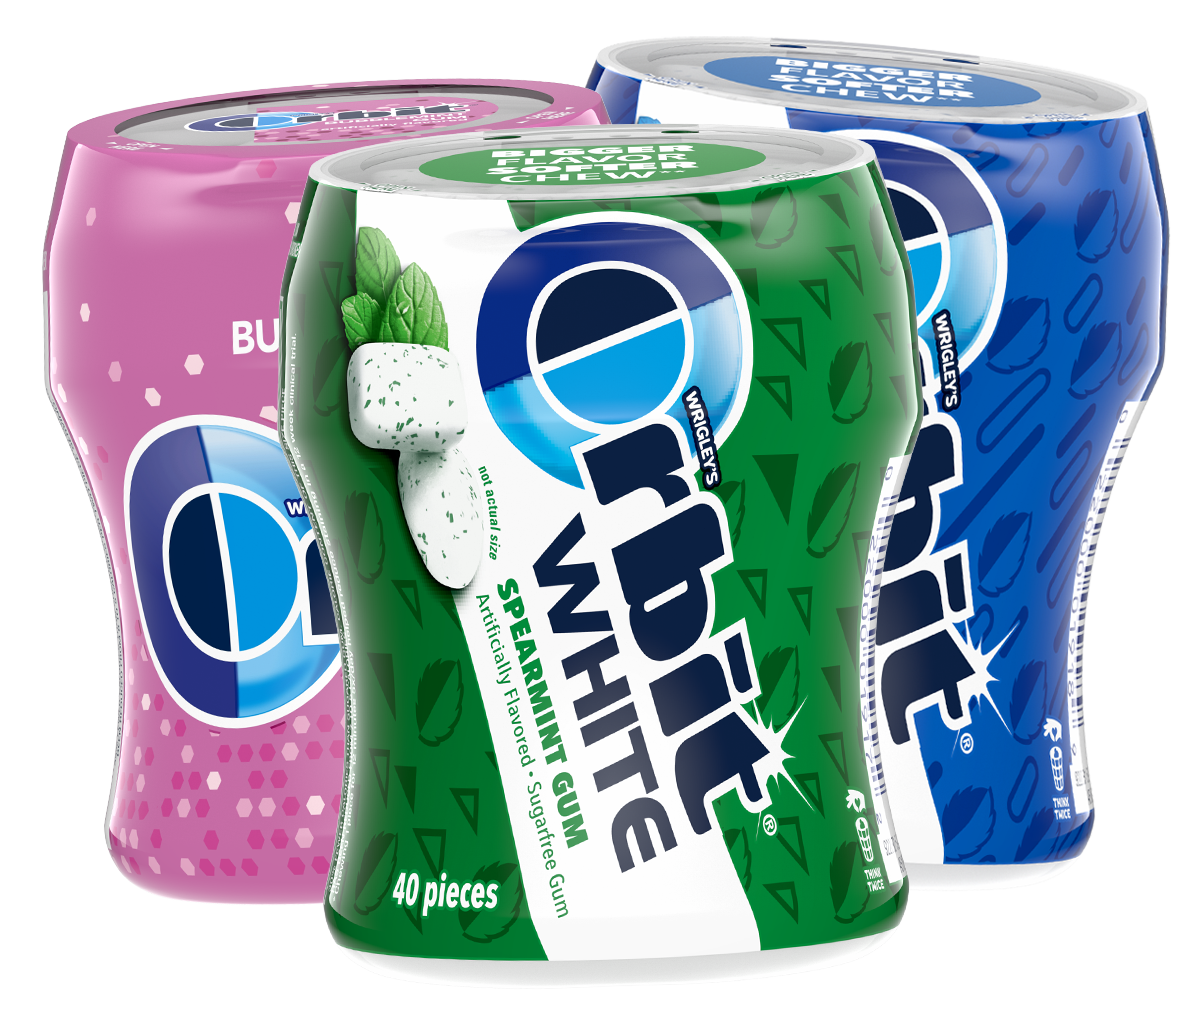 Collection of Orbit Gum products.